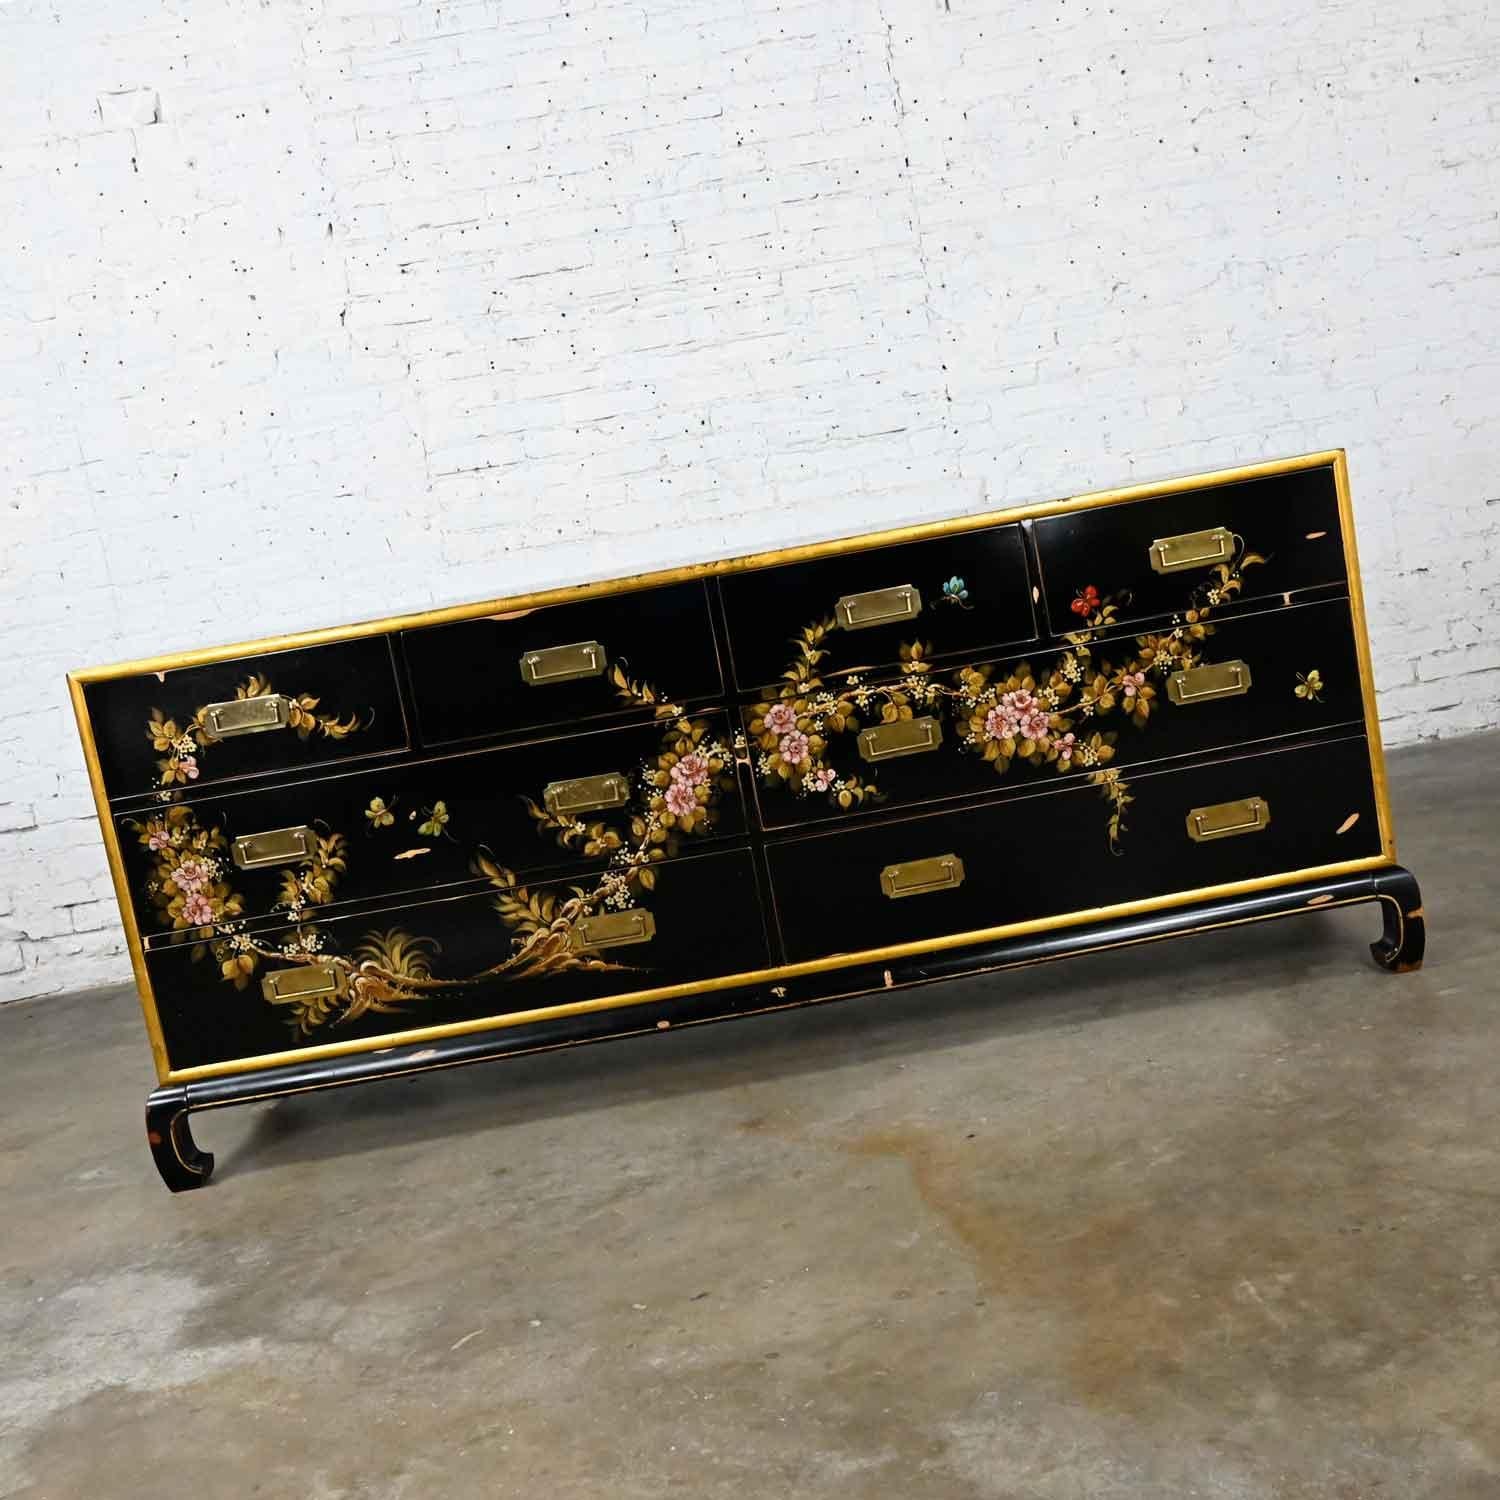 American Vintage Union National Chinoiserie Dresser Black W/ Floral Design & Distressing